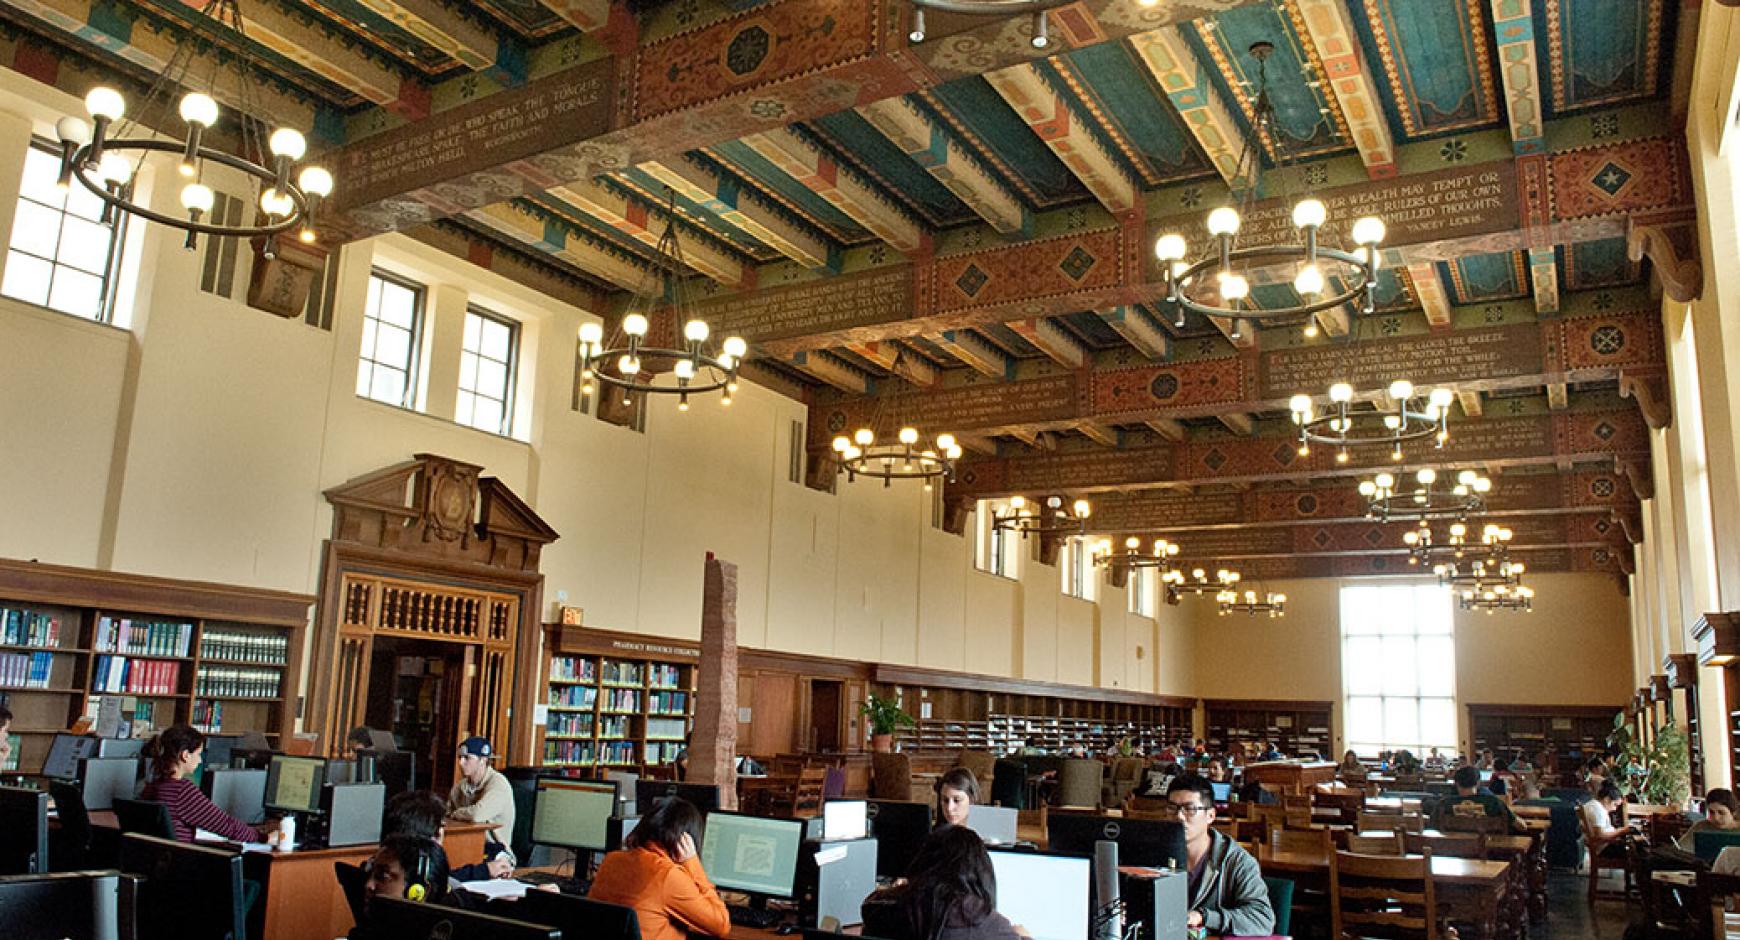 students working in traditional library space at the life science library